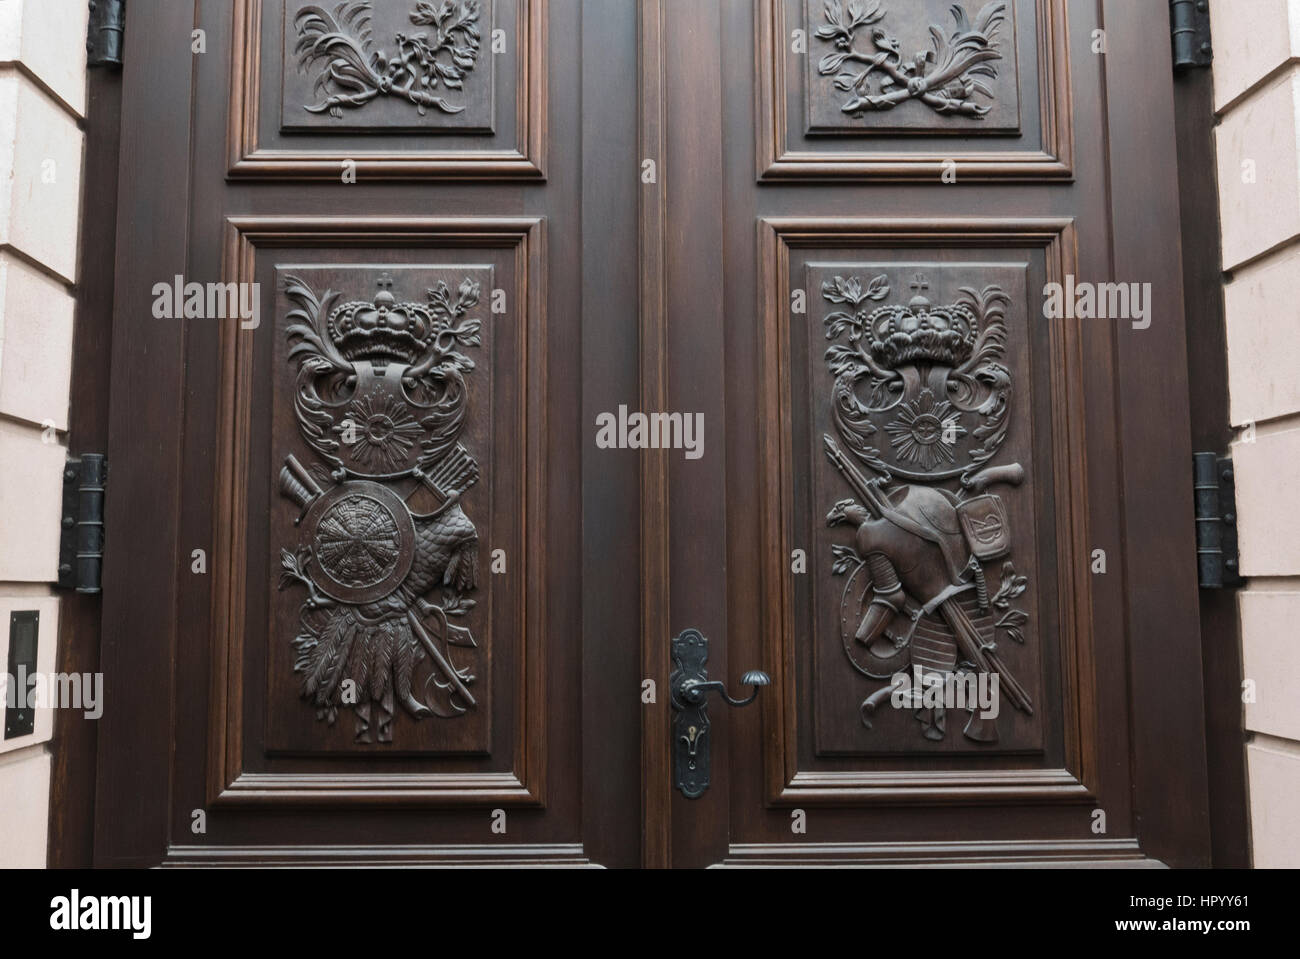 Wooden door with intricate designs at the Zeughaus Museum, Berlin, Germany Stock Photo